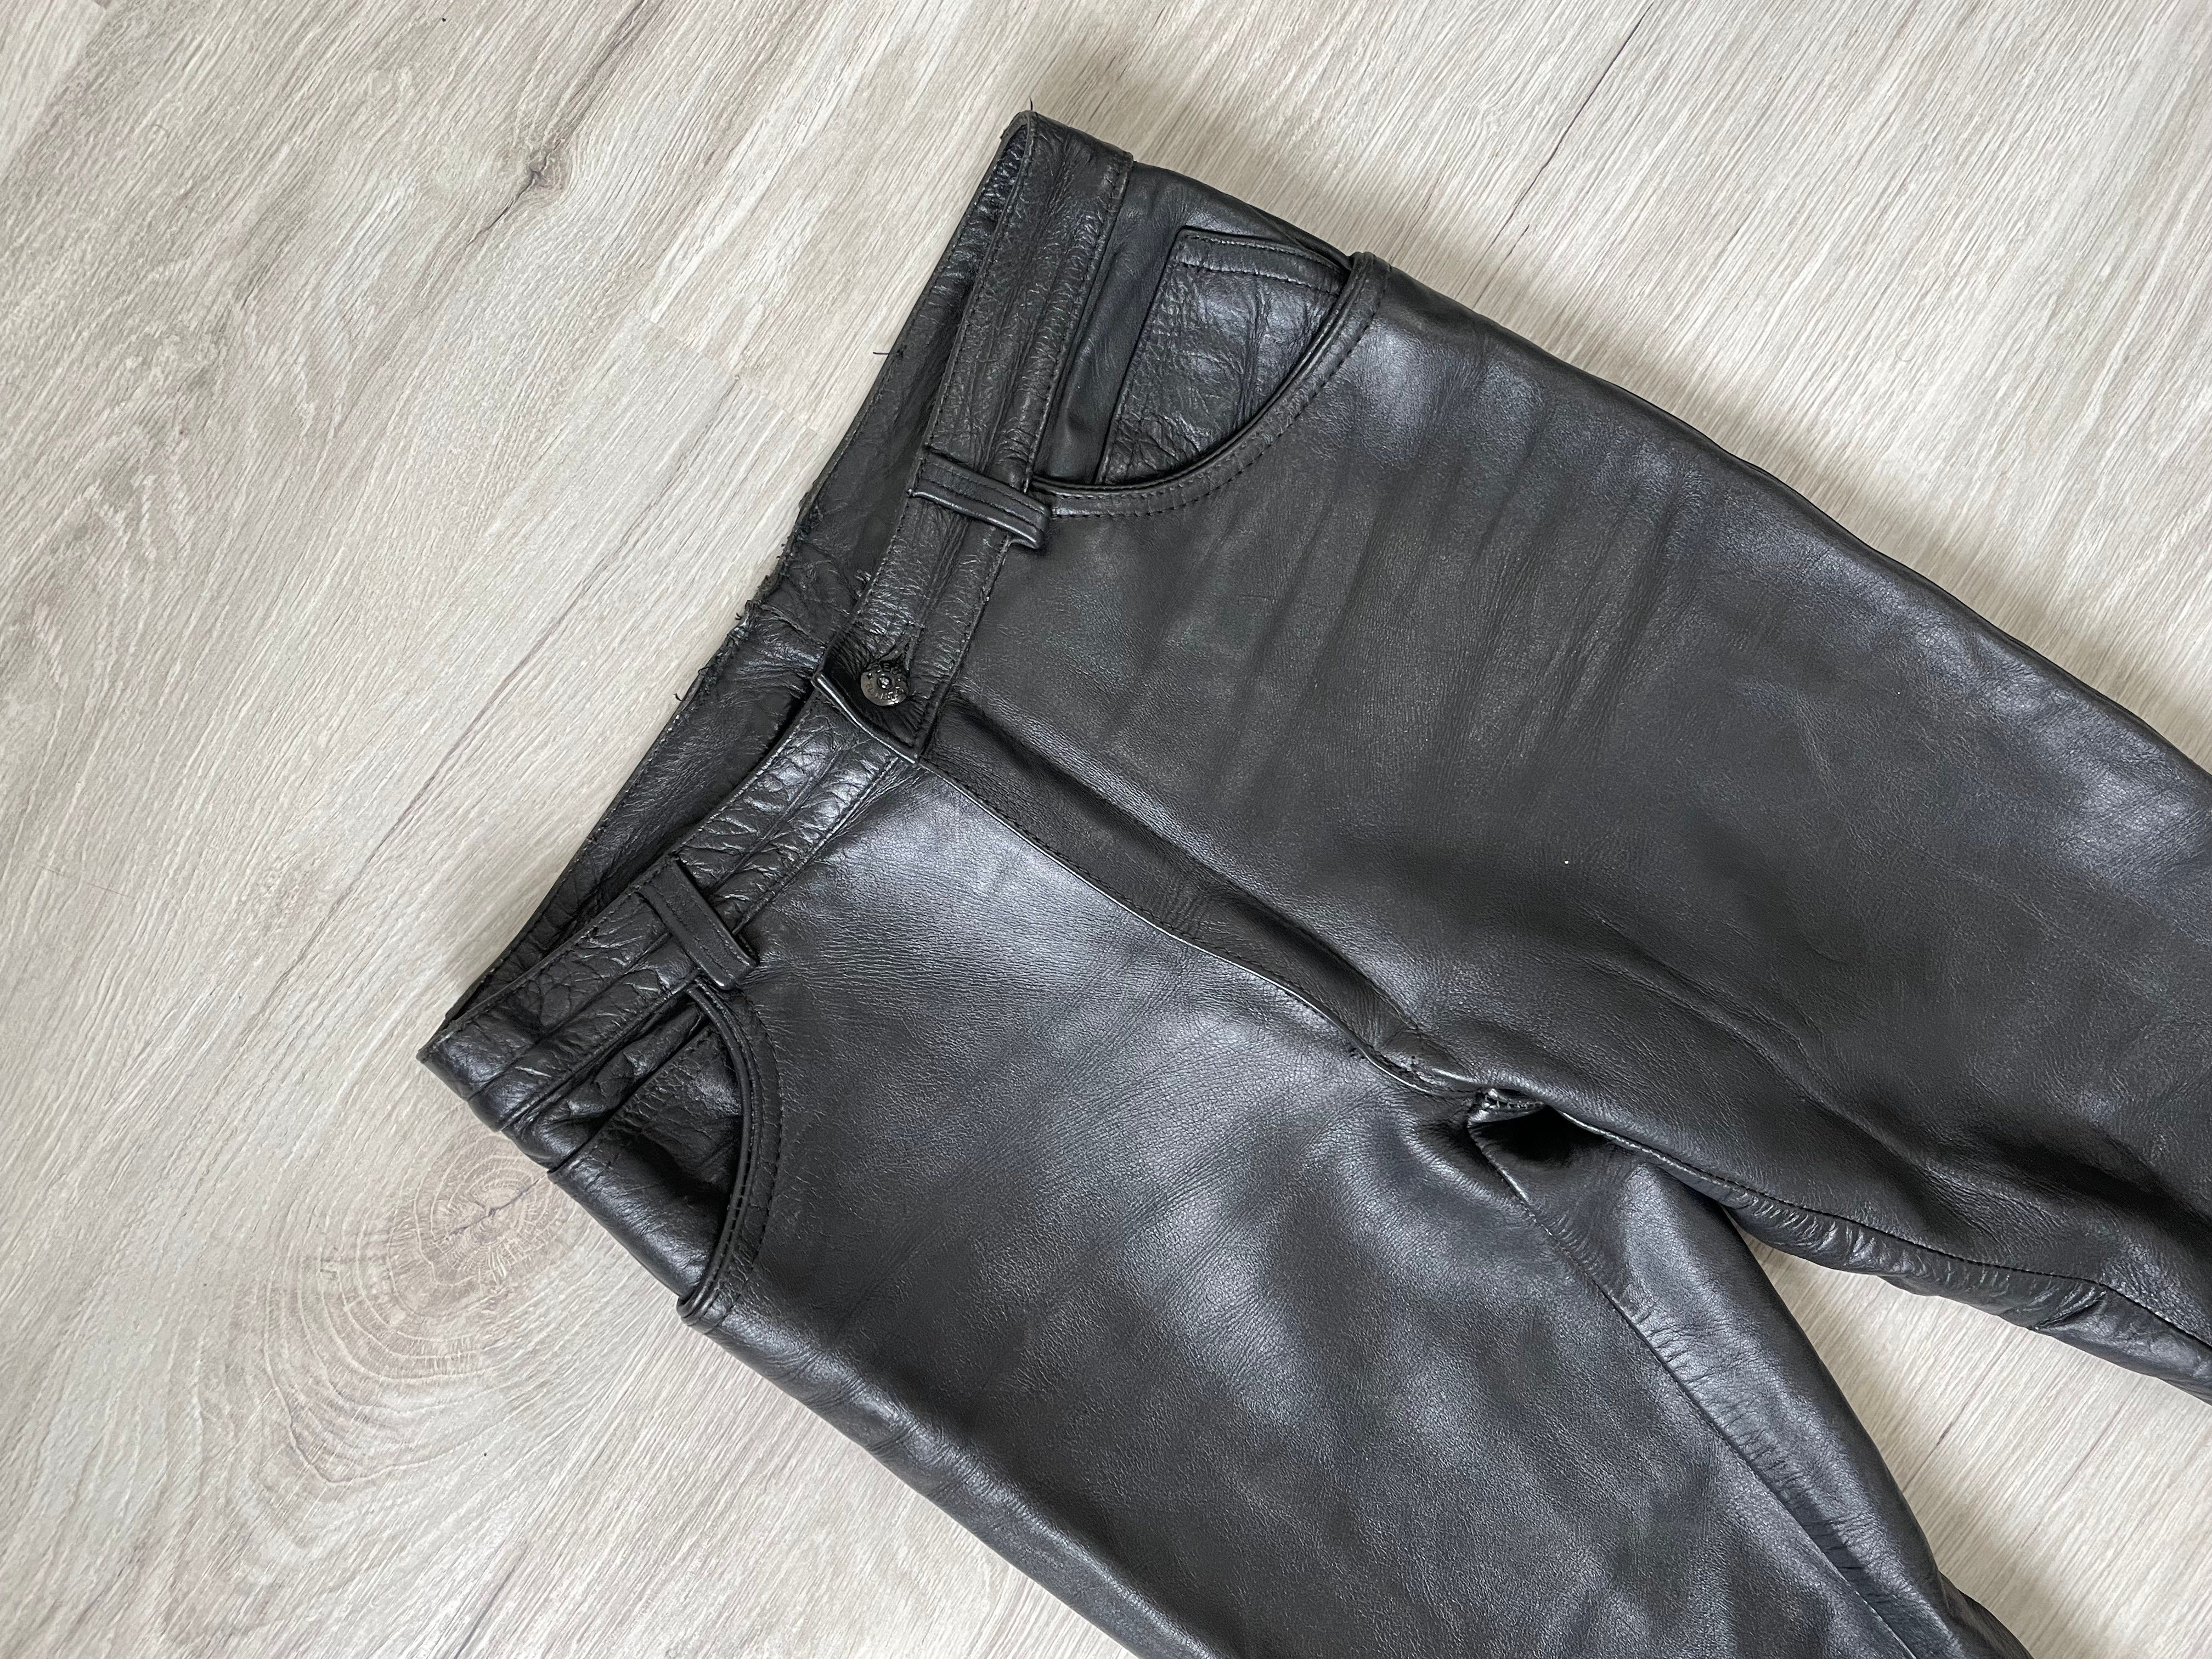 Pre-owned Leather X Moto Vintage Leather Pants Motorcycle Bike In Black